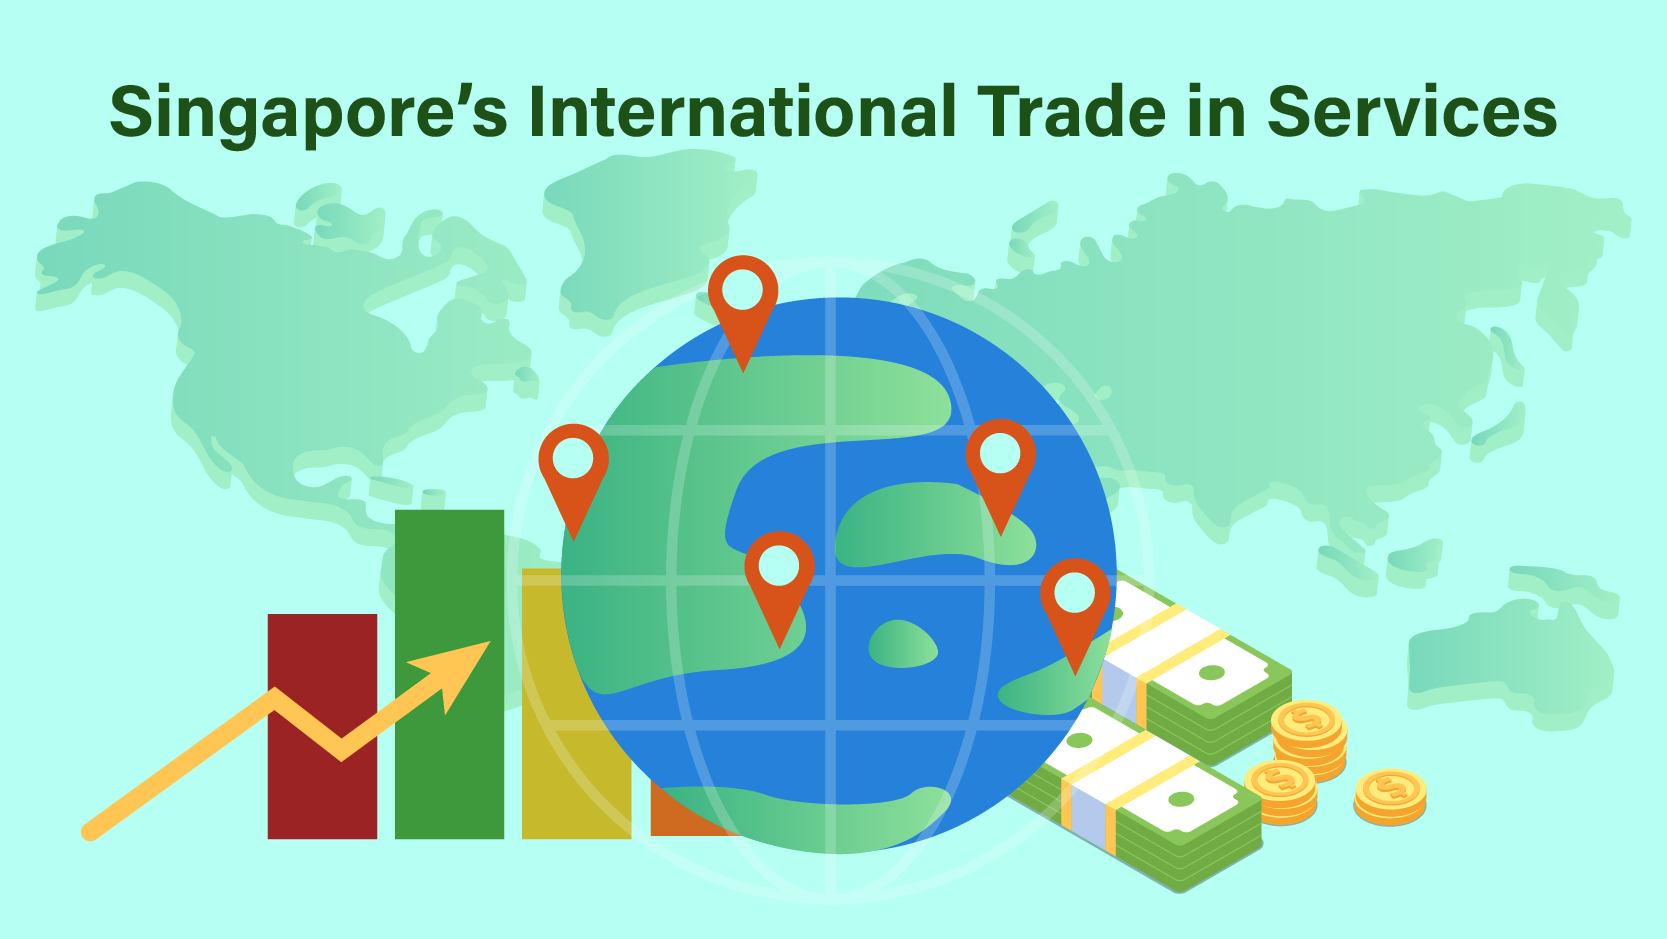 Singapore's International Trade in Services Dashboard